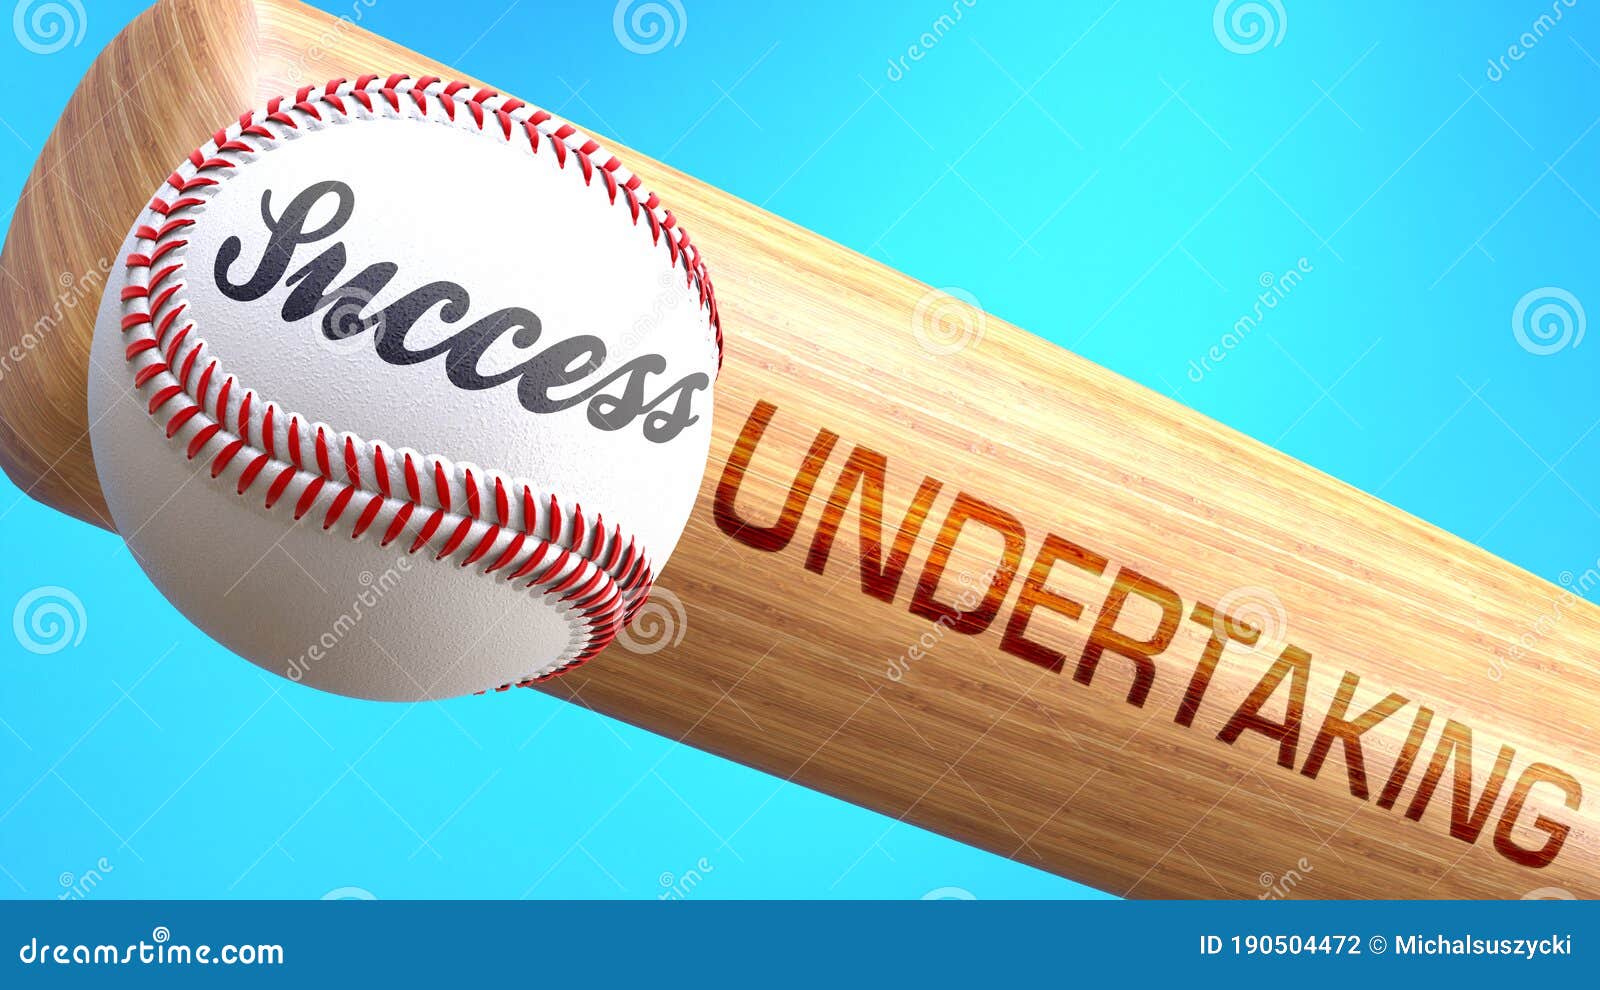 success in life depends on undertaking - pictured as word undertaking on a bat, to show that undertaking is crucial for successful